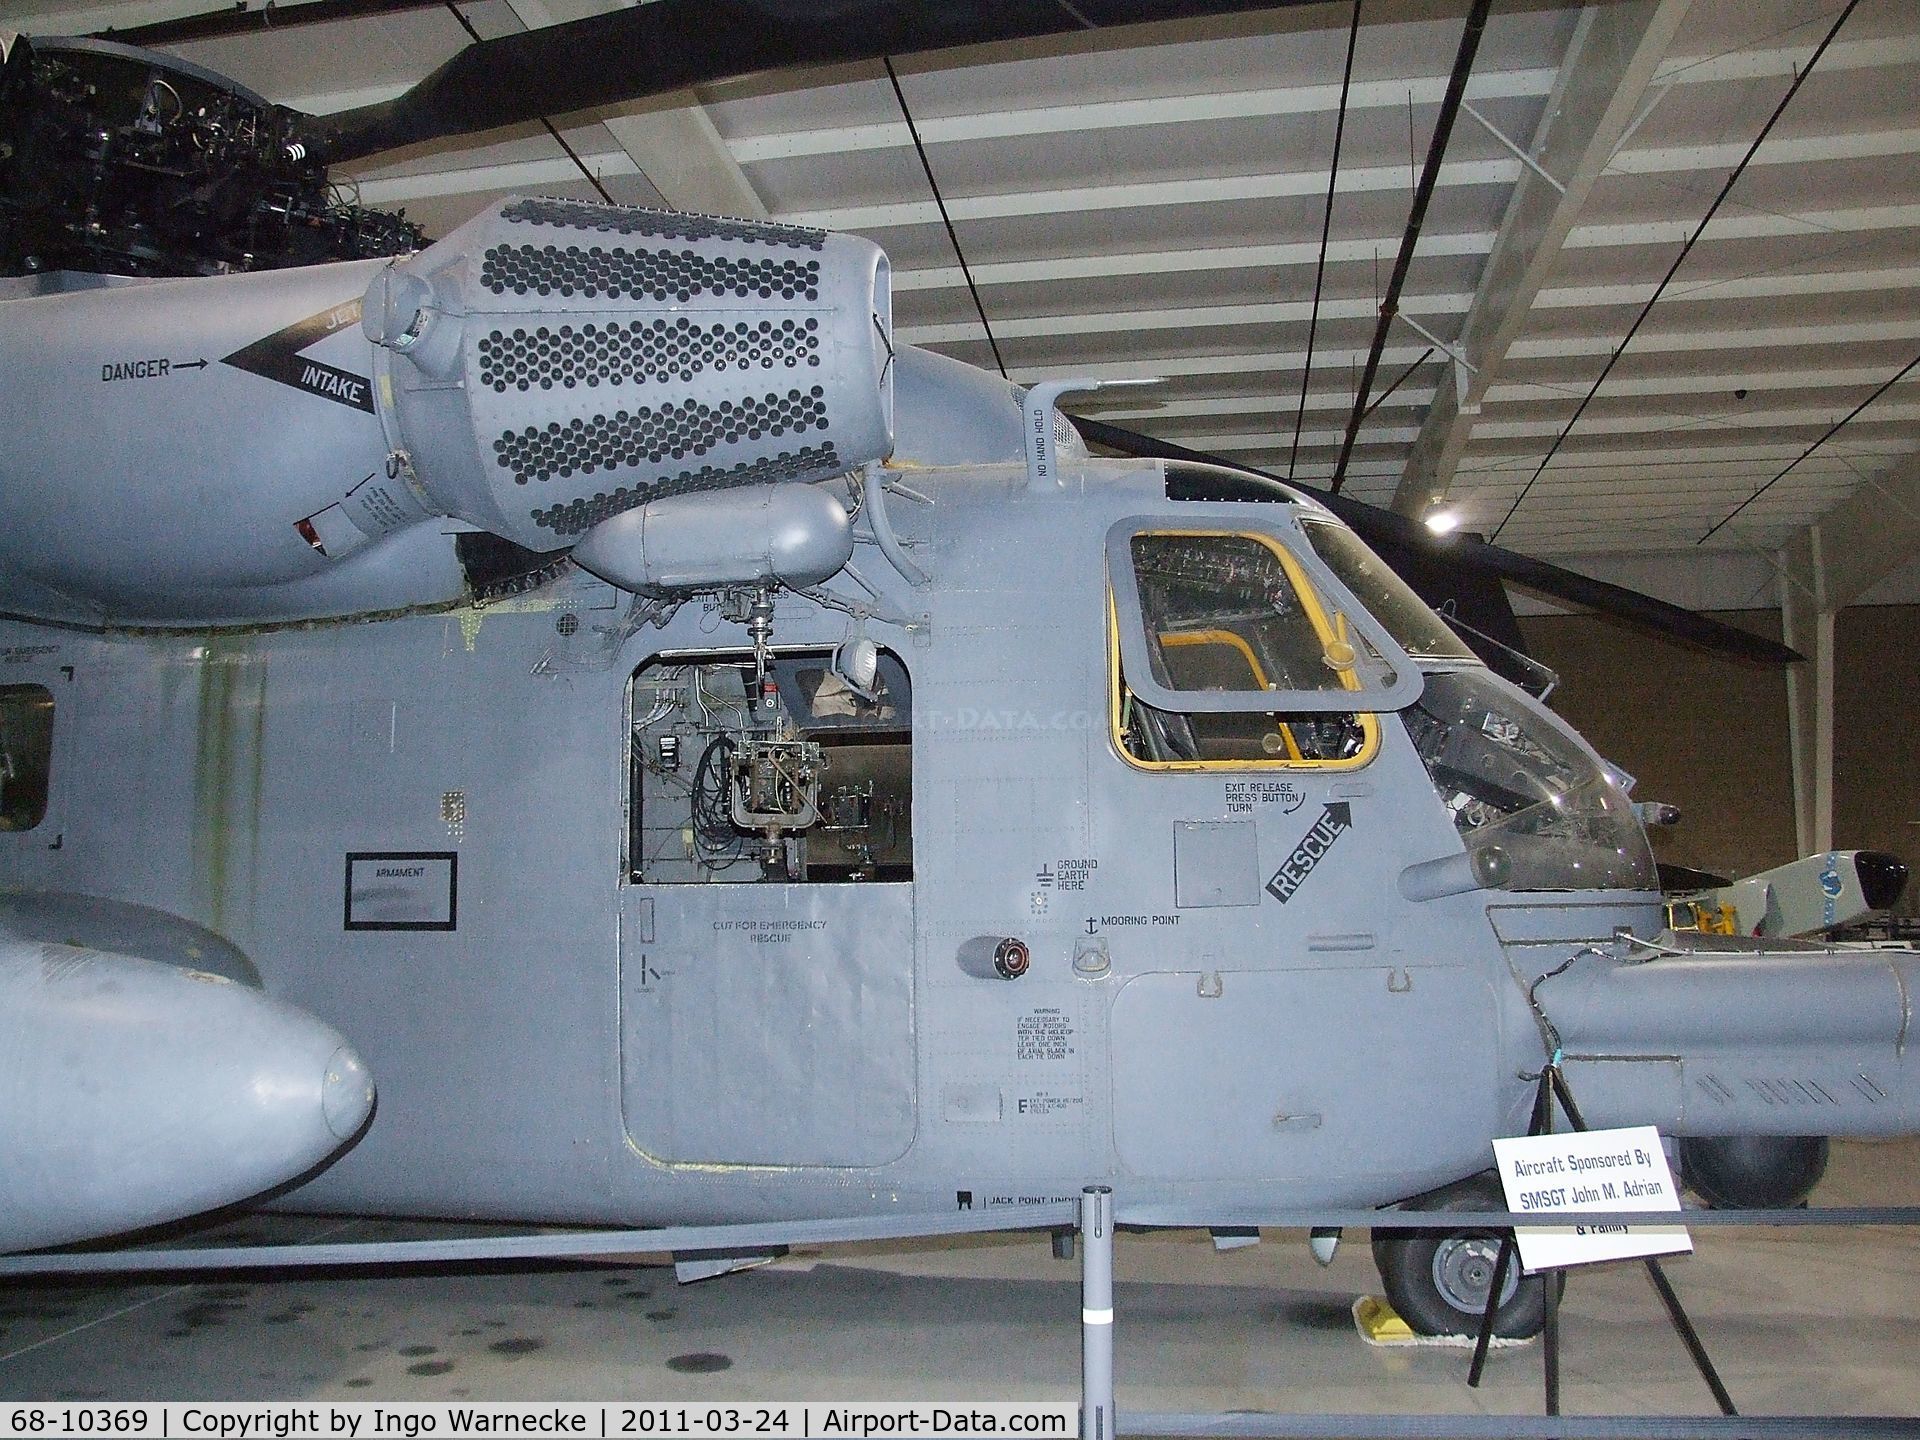 68-10369, 1968 Sikorsky MH-53M Pave Low IV C/N 65-199, Sikorsky HH-53C Super Jolly Green Giant at the Hill Aerospace Museum, Roy UT